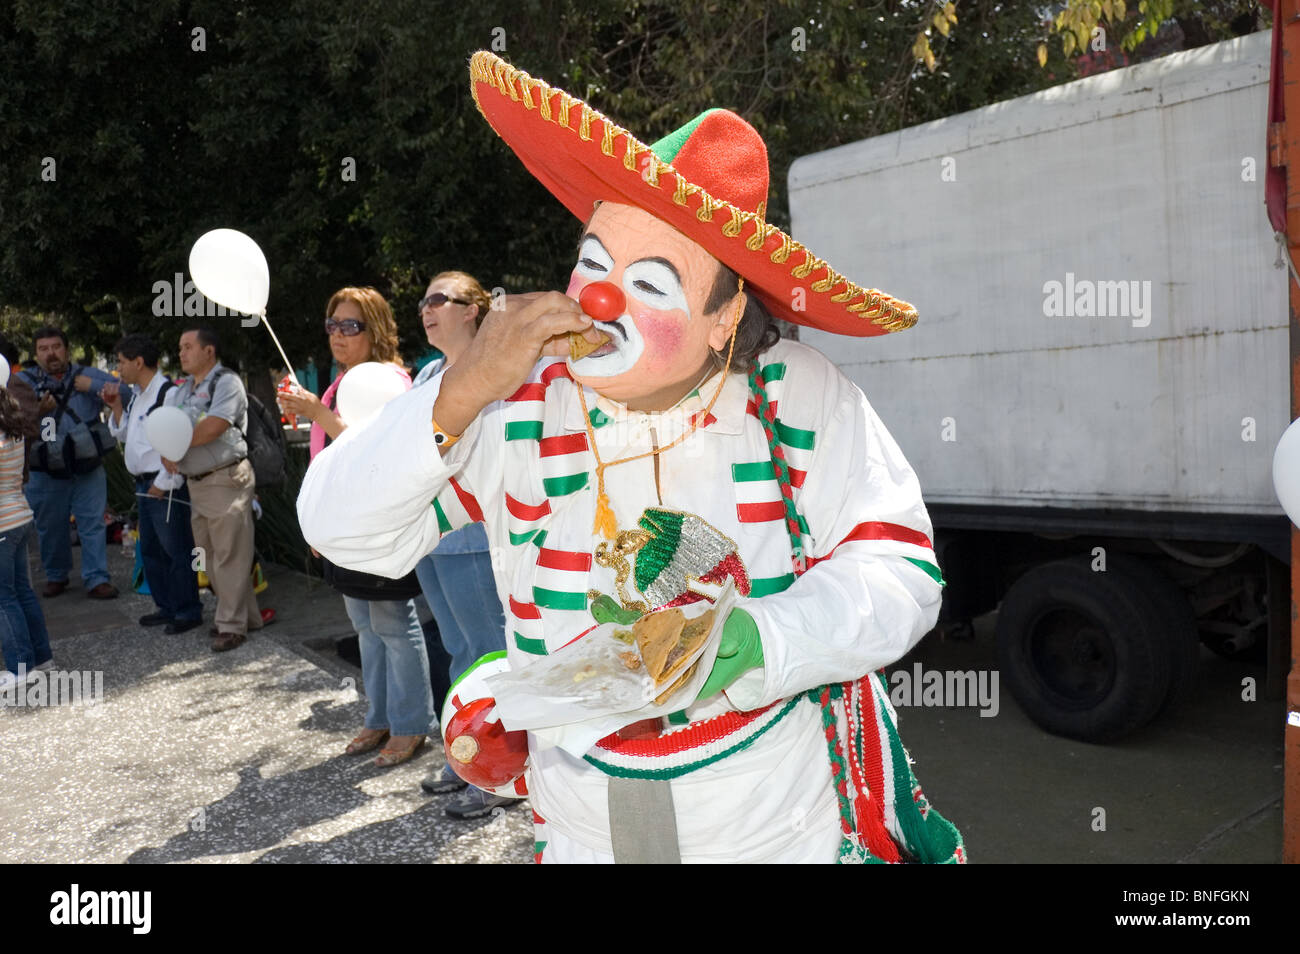 mexican-clown-eating-a-taco-during-a-clown-parade-in-mexico-city-with-BNFGKN.jpg